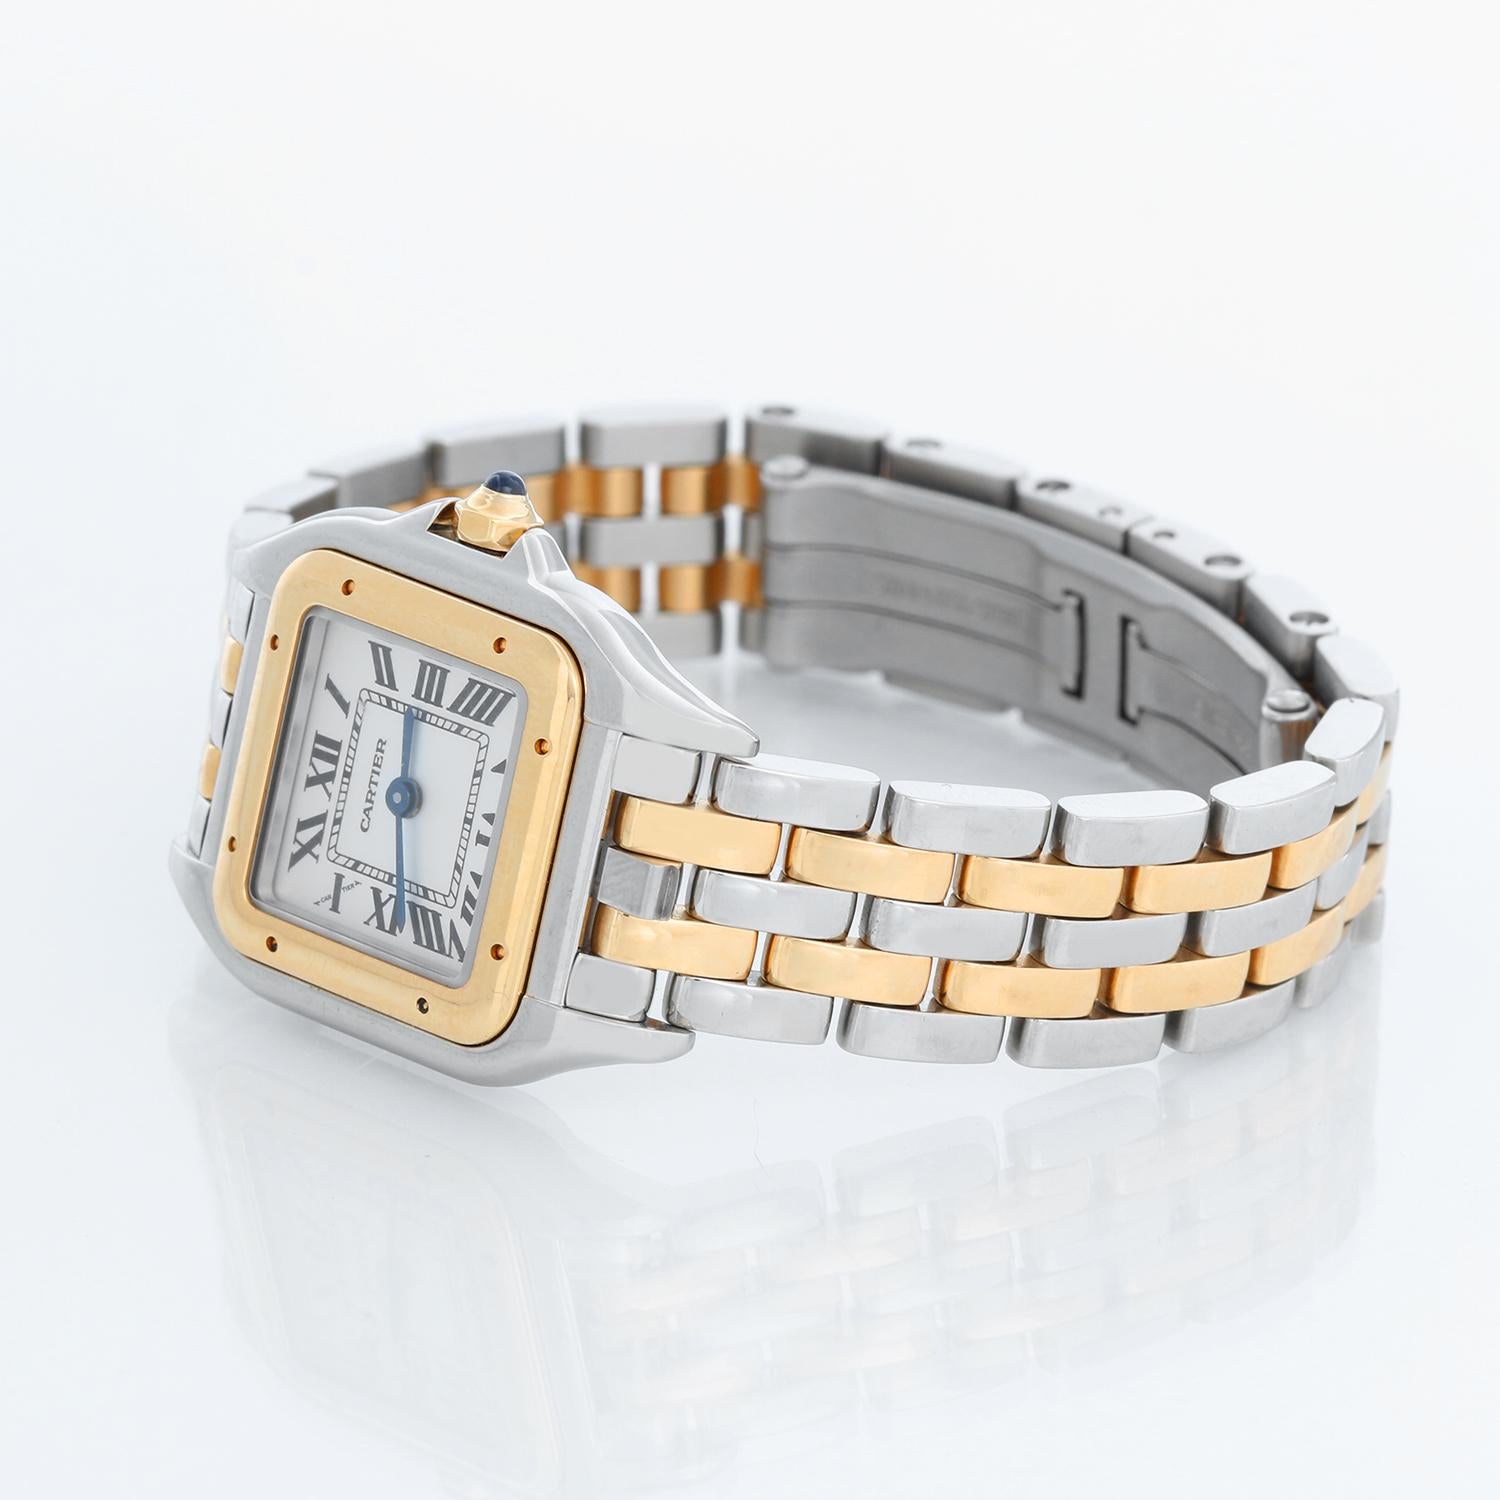 Cartier Panther Small 2-Tone Steel & Gold Panthere Watch 4023 - Quartz. Stainless steel case with 18k yellow gold bezel (22mm x 30mm). White colored dial with black Roman numerals. Stainless steel Panthere bracelet with 2-row of 18k yellow gold